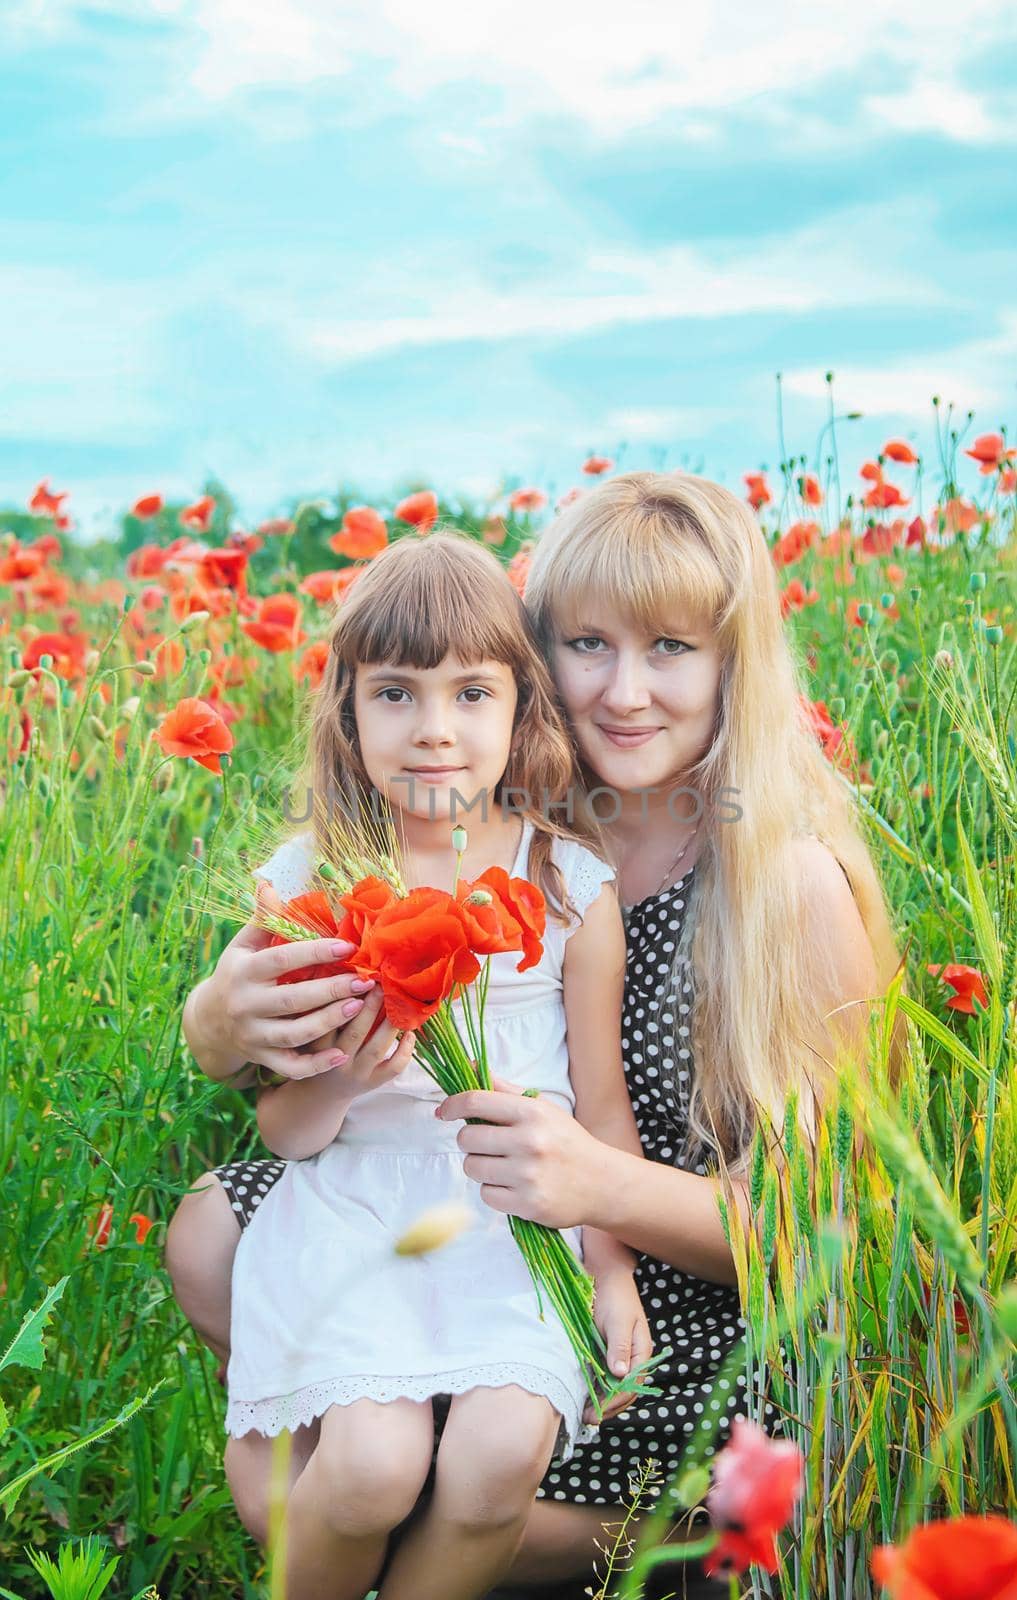 children girl in a field with poppies. selective focus. by yanadjana